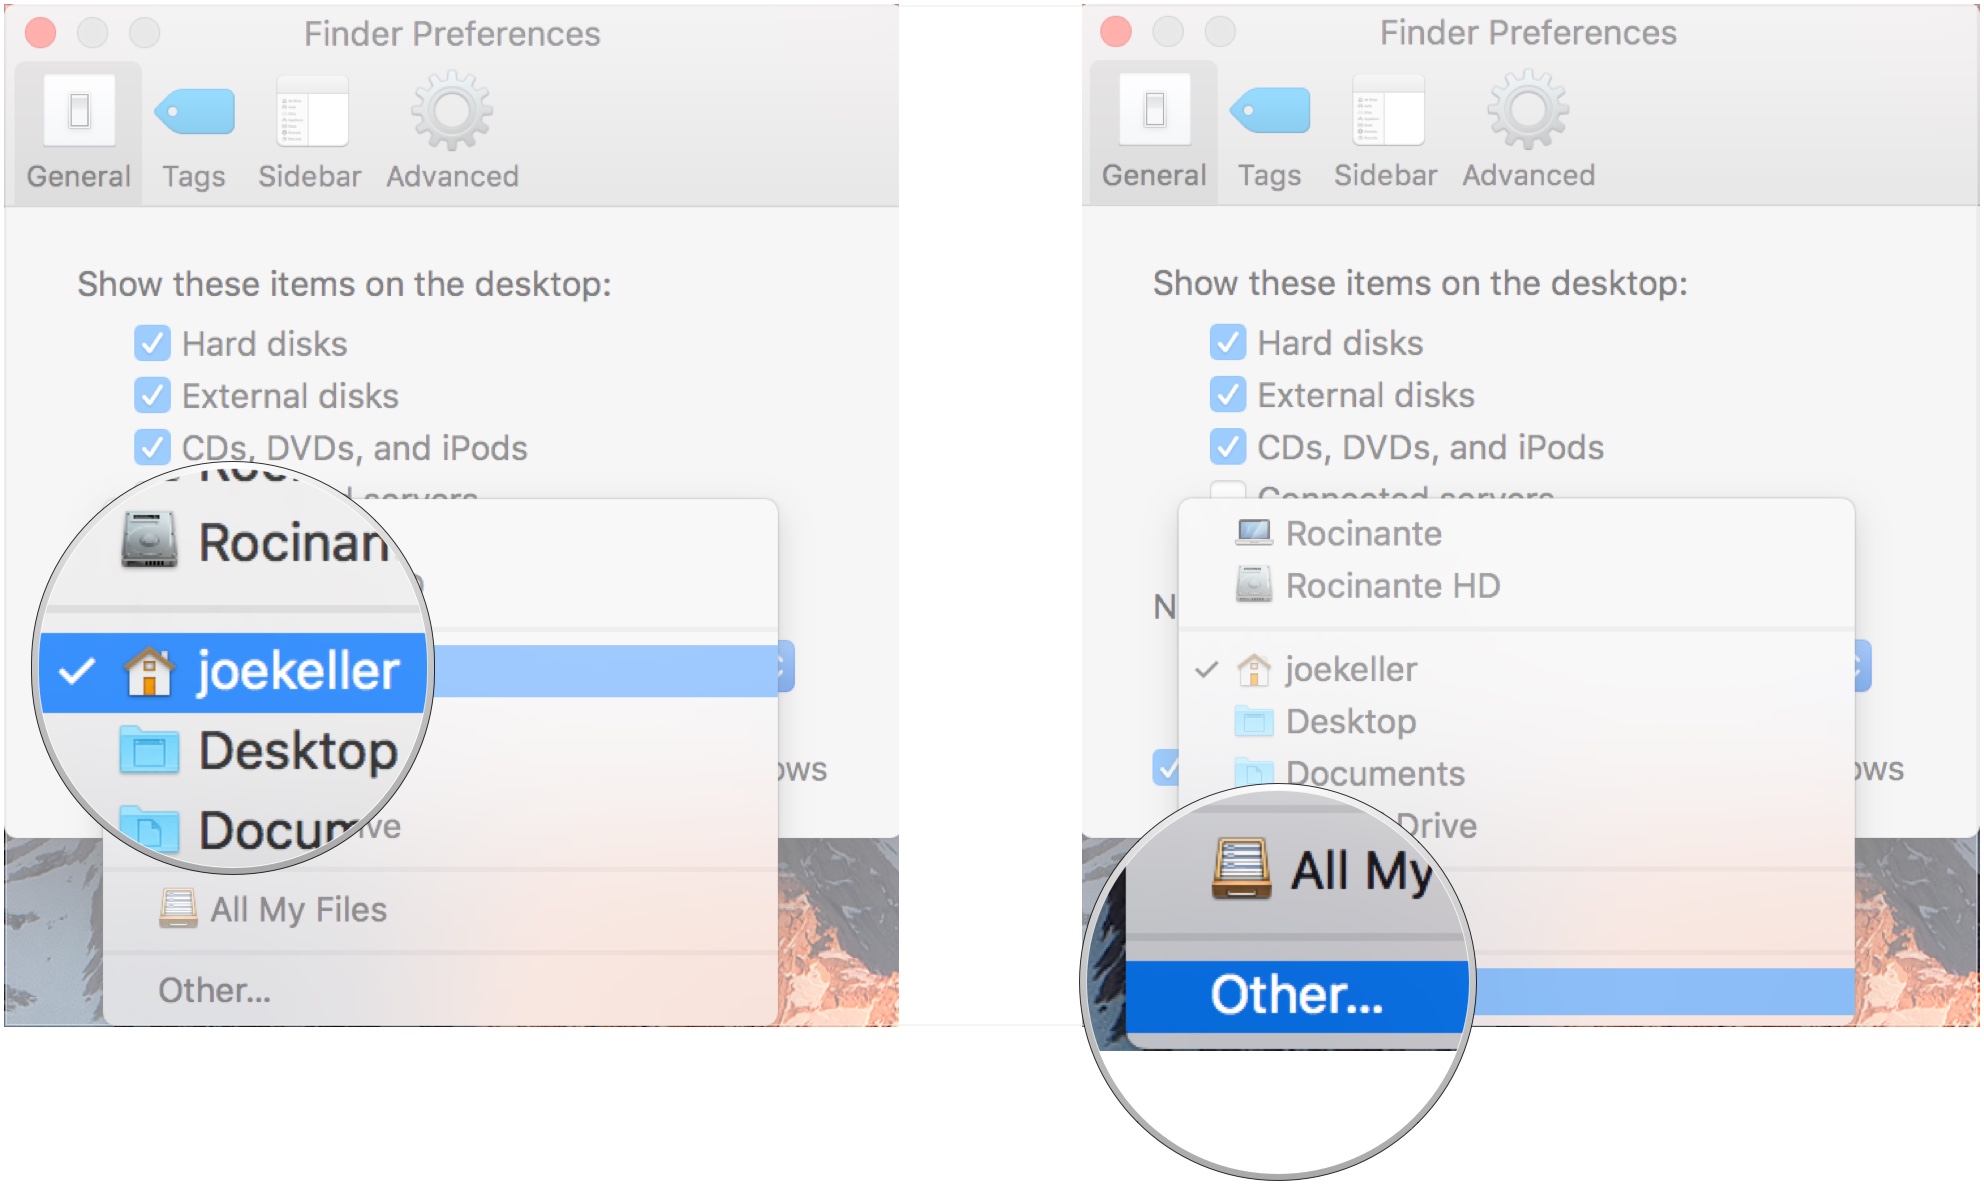 To set a new Finder window's default section, click on folder or storage device you want in the drop-down menu. Choose Other if you can't find your desired location.